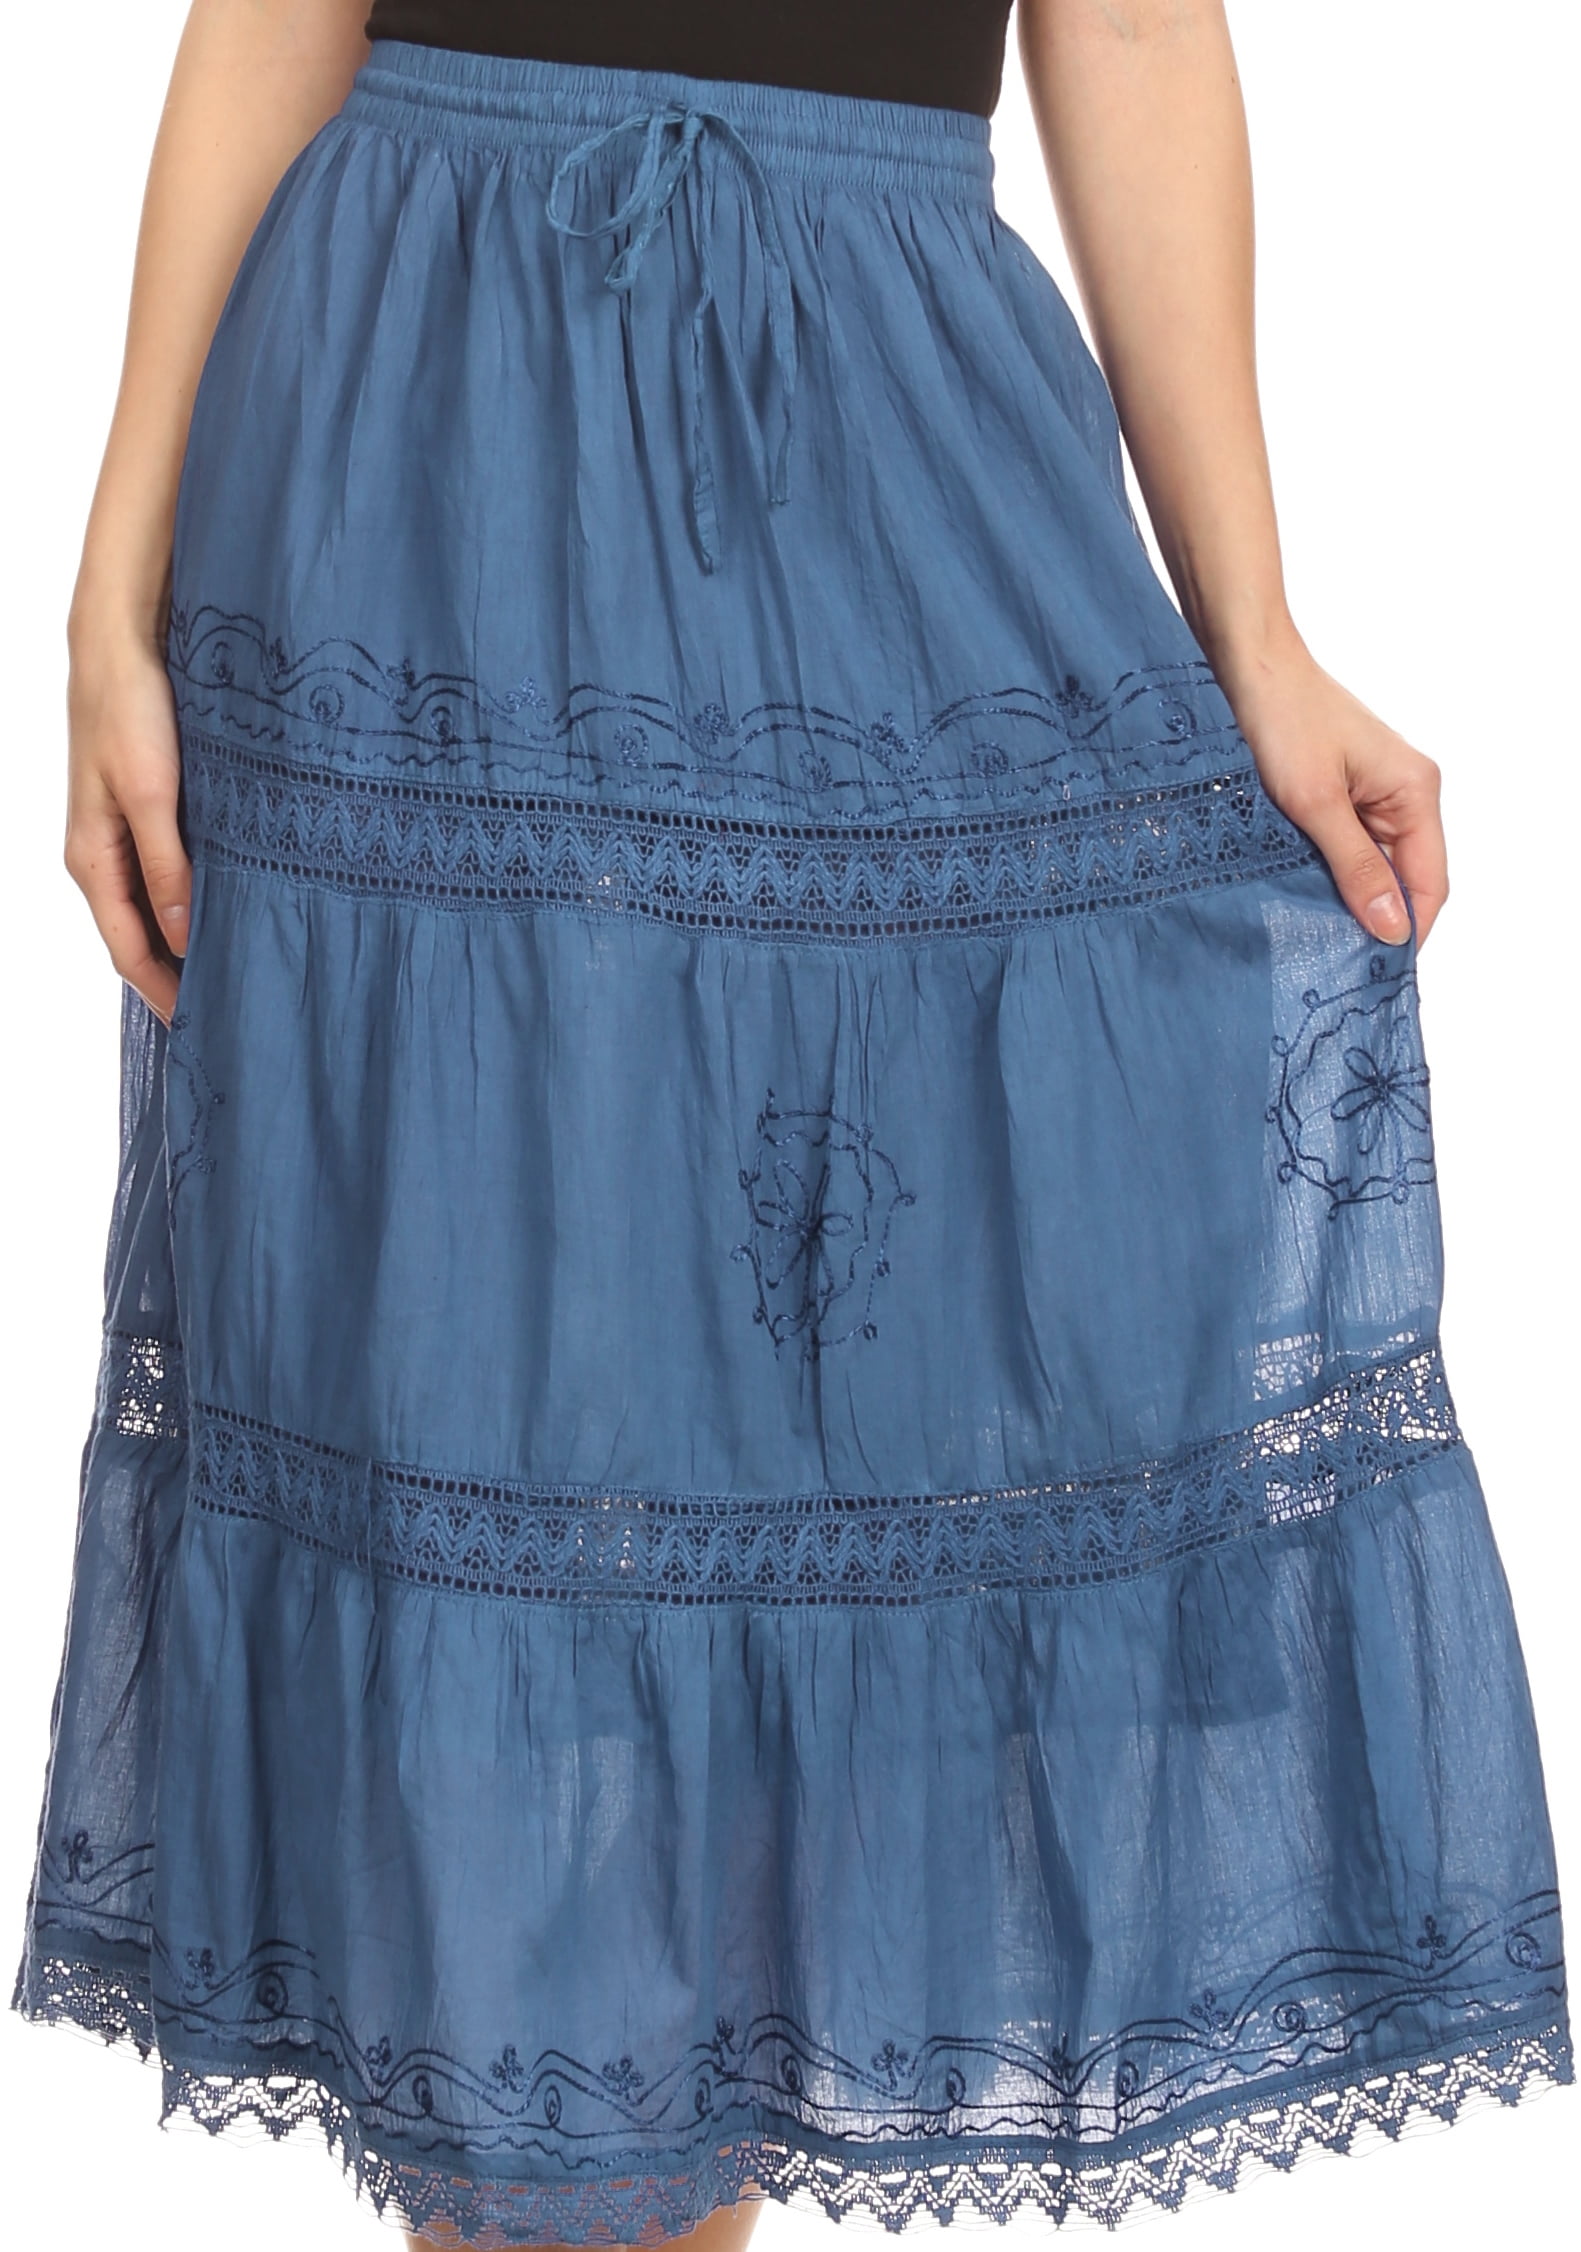 Sakkas Solid Embroidered Gypsy Bohemian Mid Length Cotton Skirt - Blue -  One Size - Walmart.com